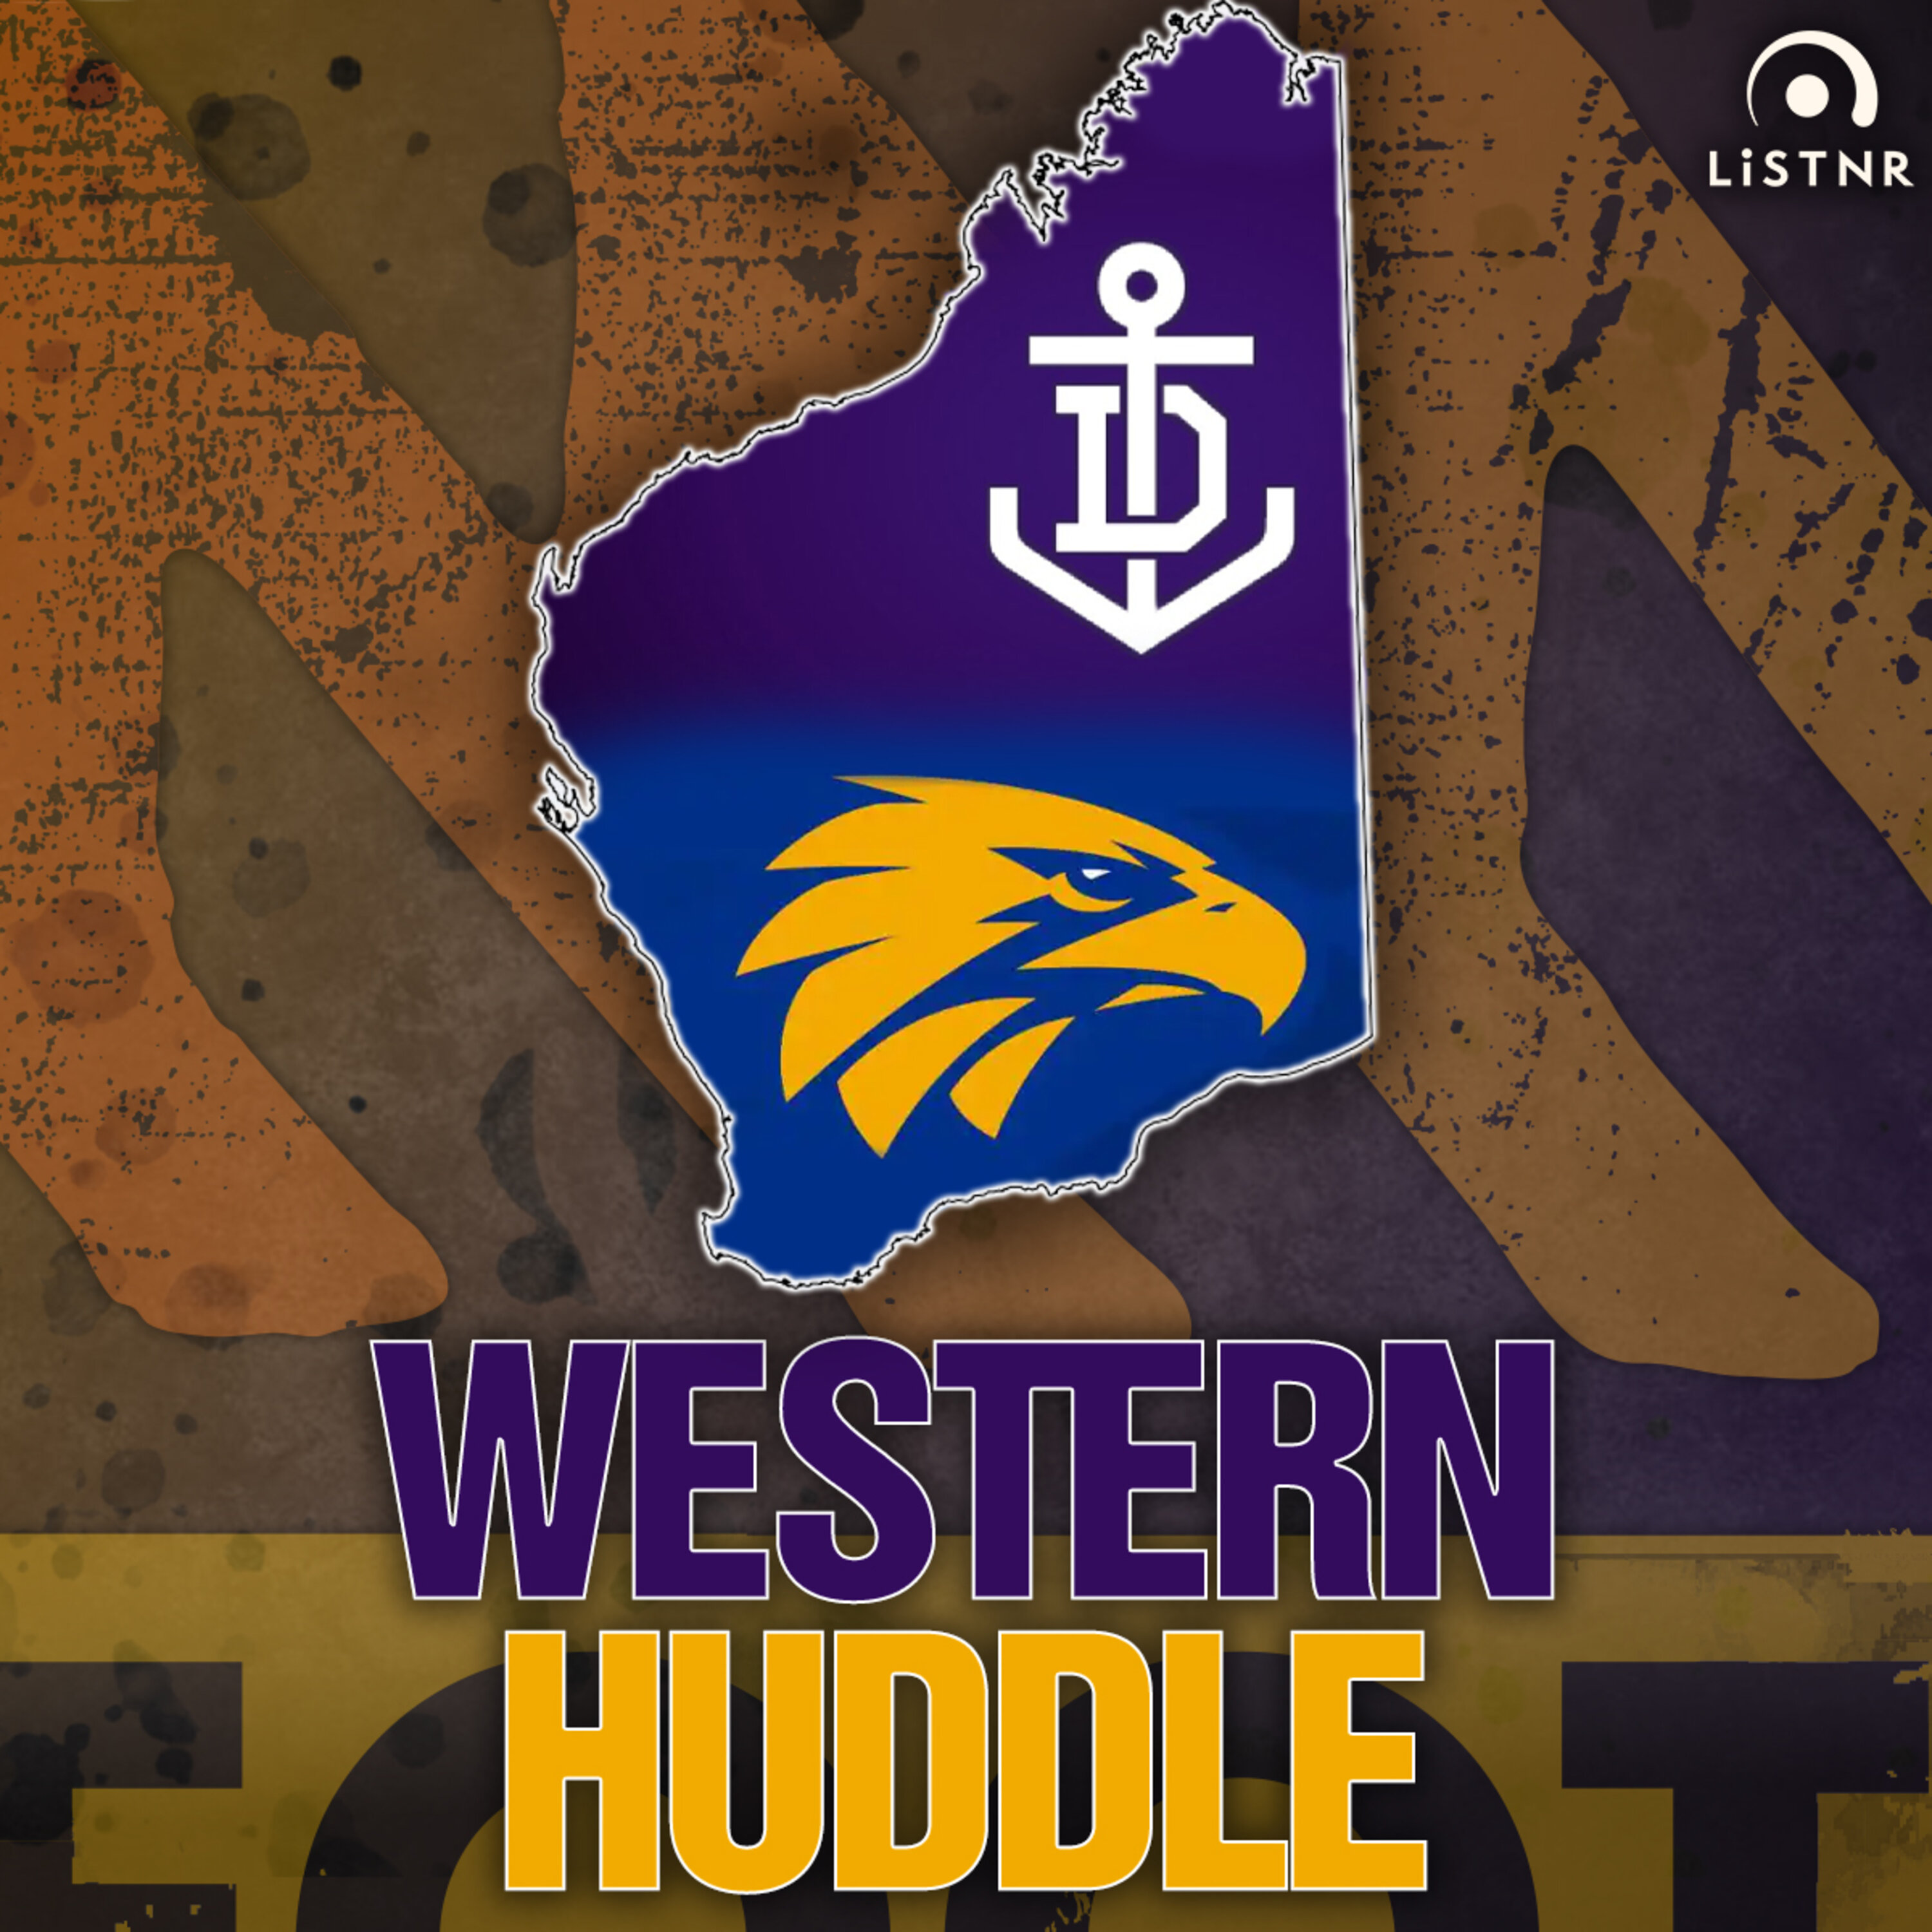 WESTERN HUDDLE | Freo's first quarter issues, Sean Darcy shows his importance, will the rain wash the Dockers' season away?